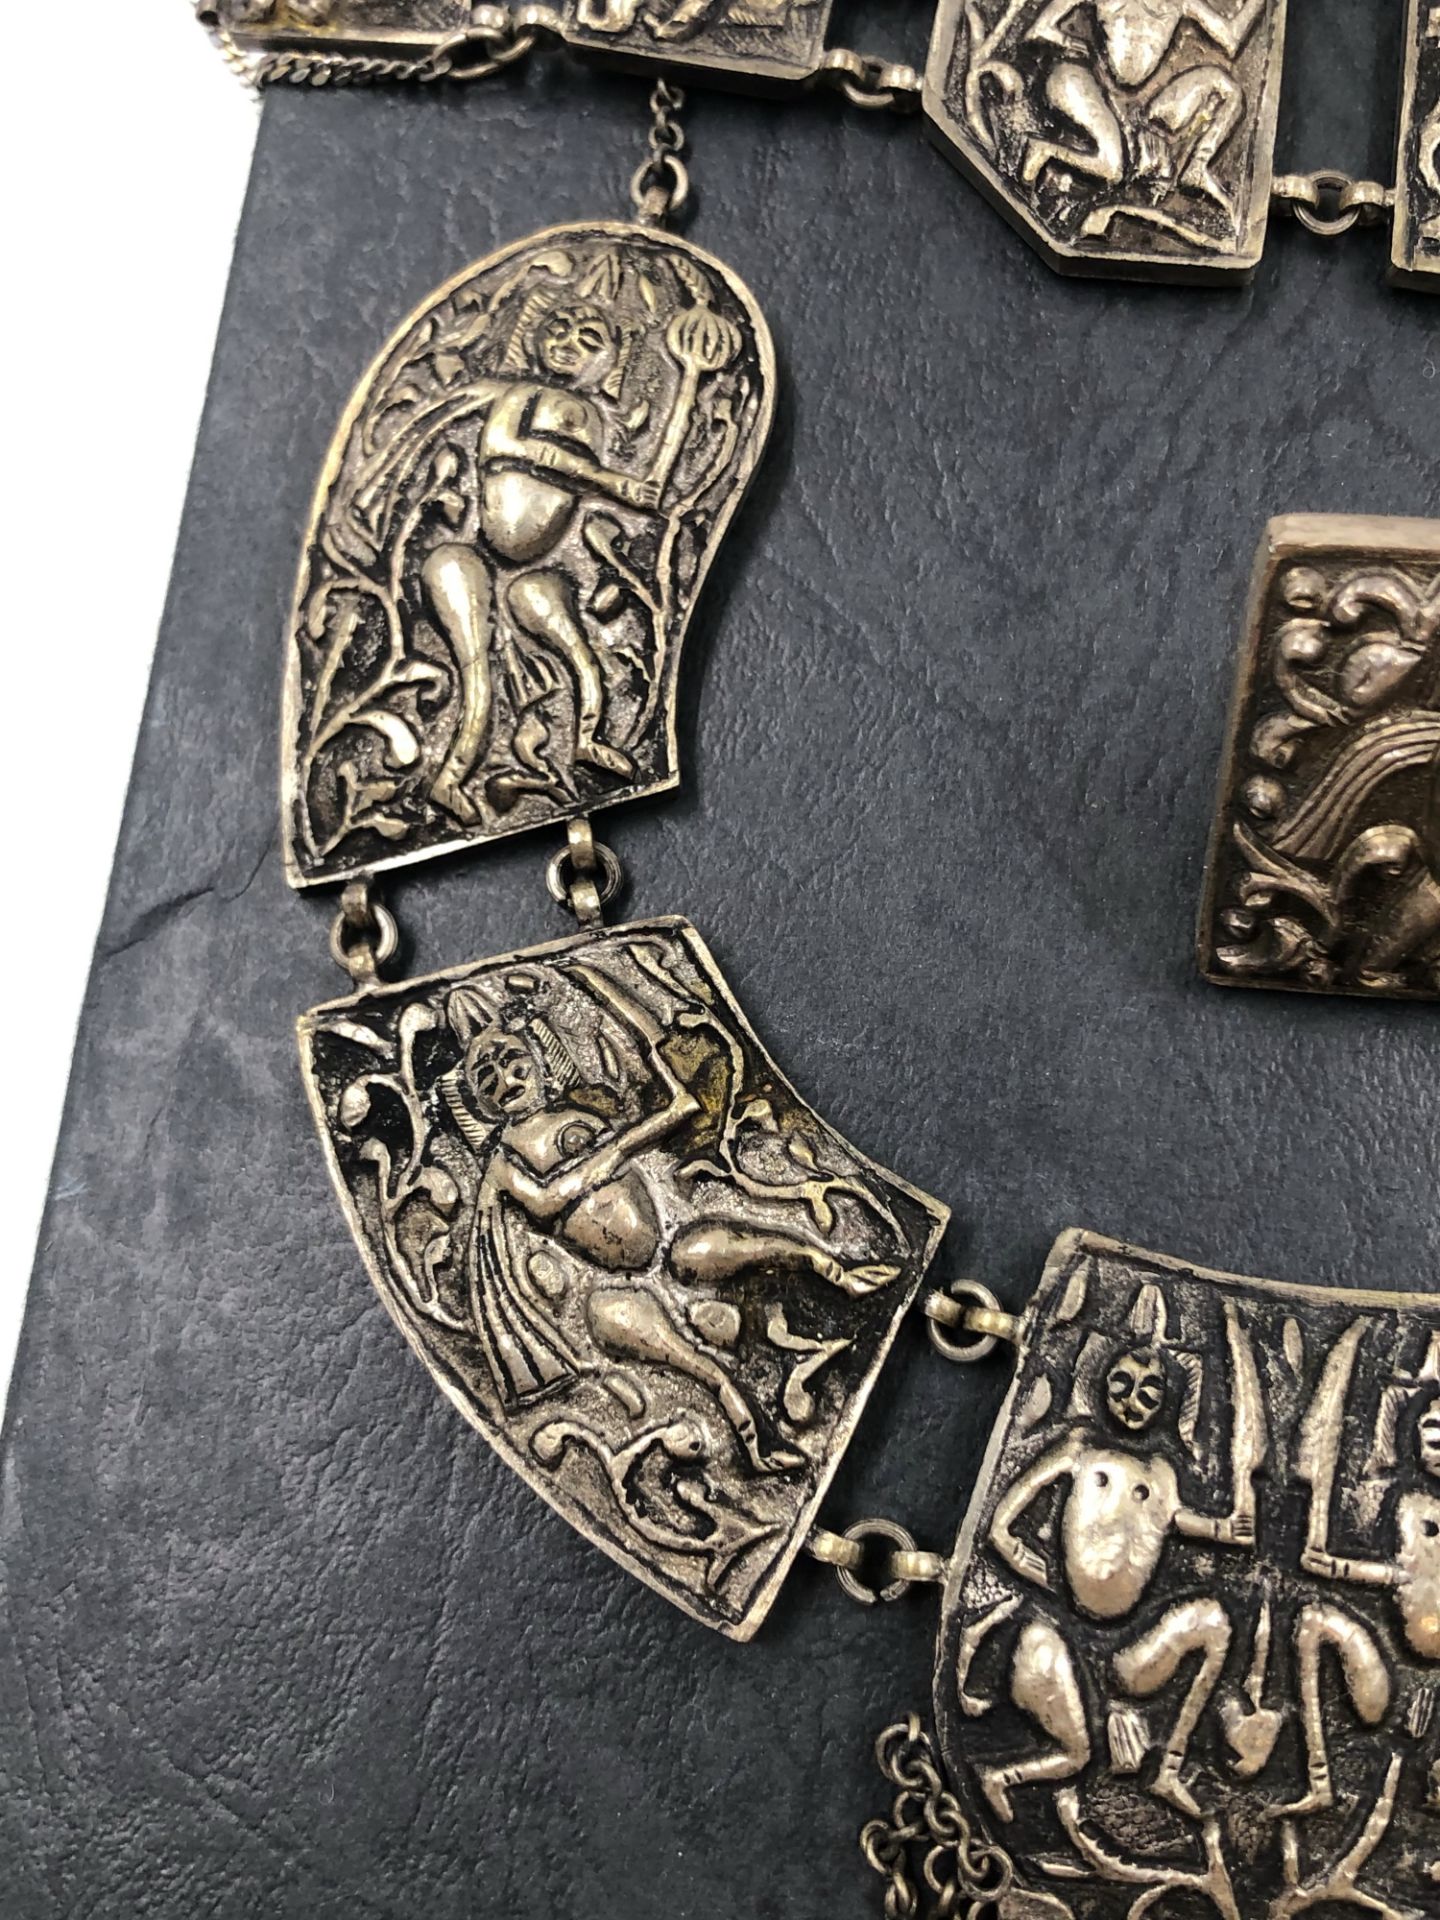 A MULTI PANEL NECKLACE, BRACELET AND RING SUITE. THE PANELS DEPICTING FIGURES IN VARIOUS SCENES. - Bild 4 aus 7